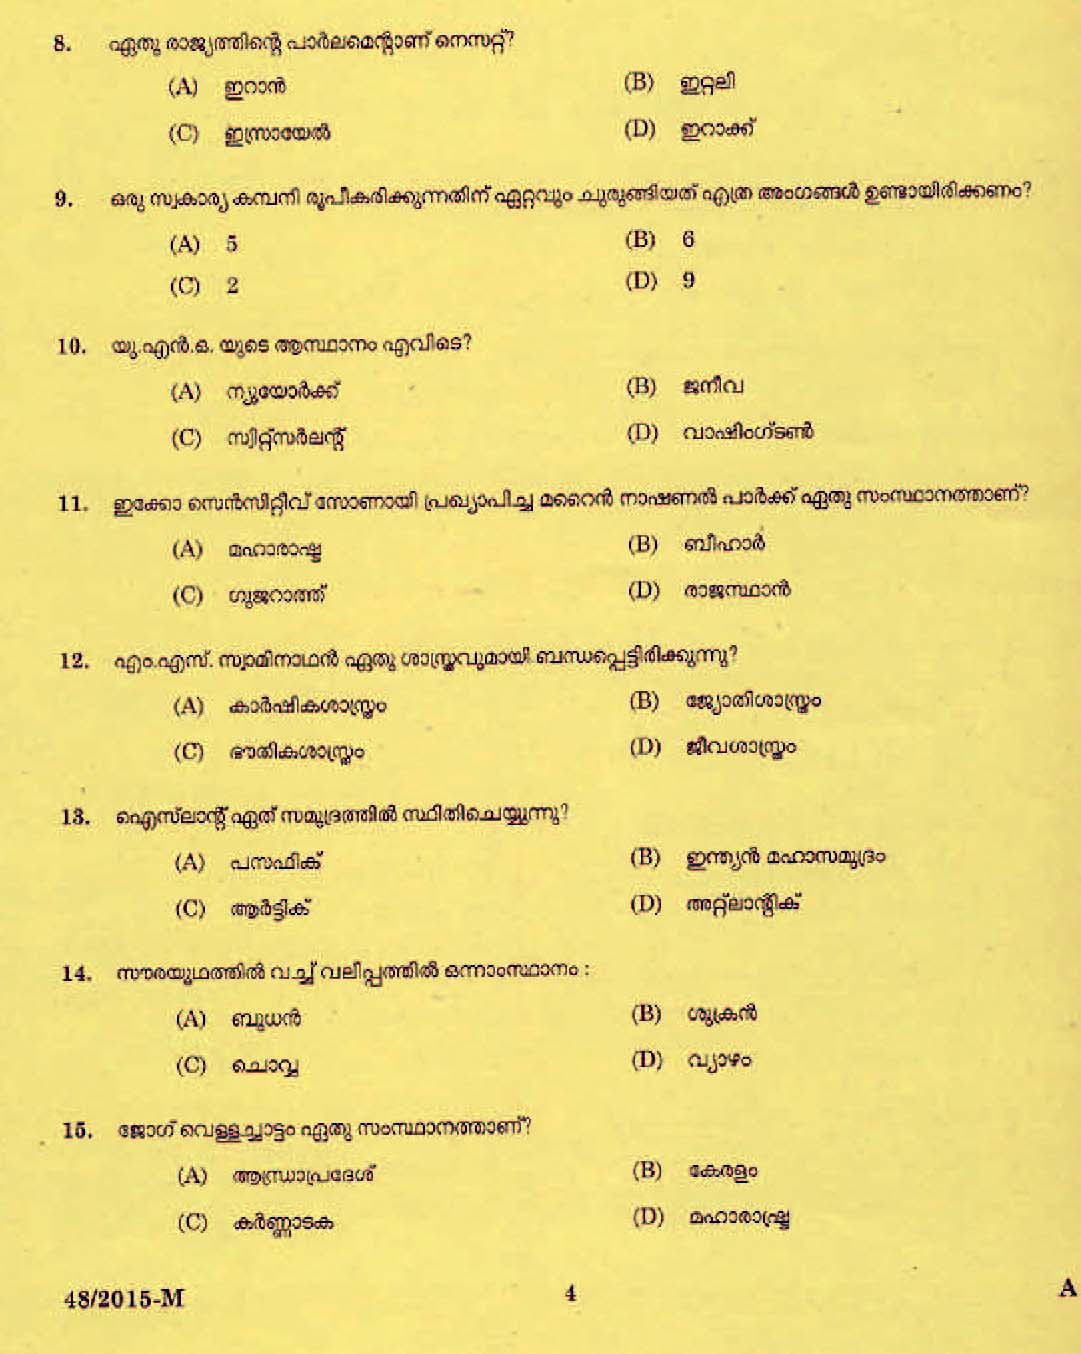 LD Clerk Bill Collector Question Paper Malayalam 2015 Paper Code 482015 M 2